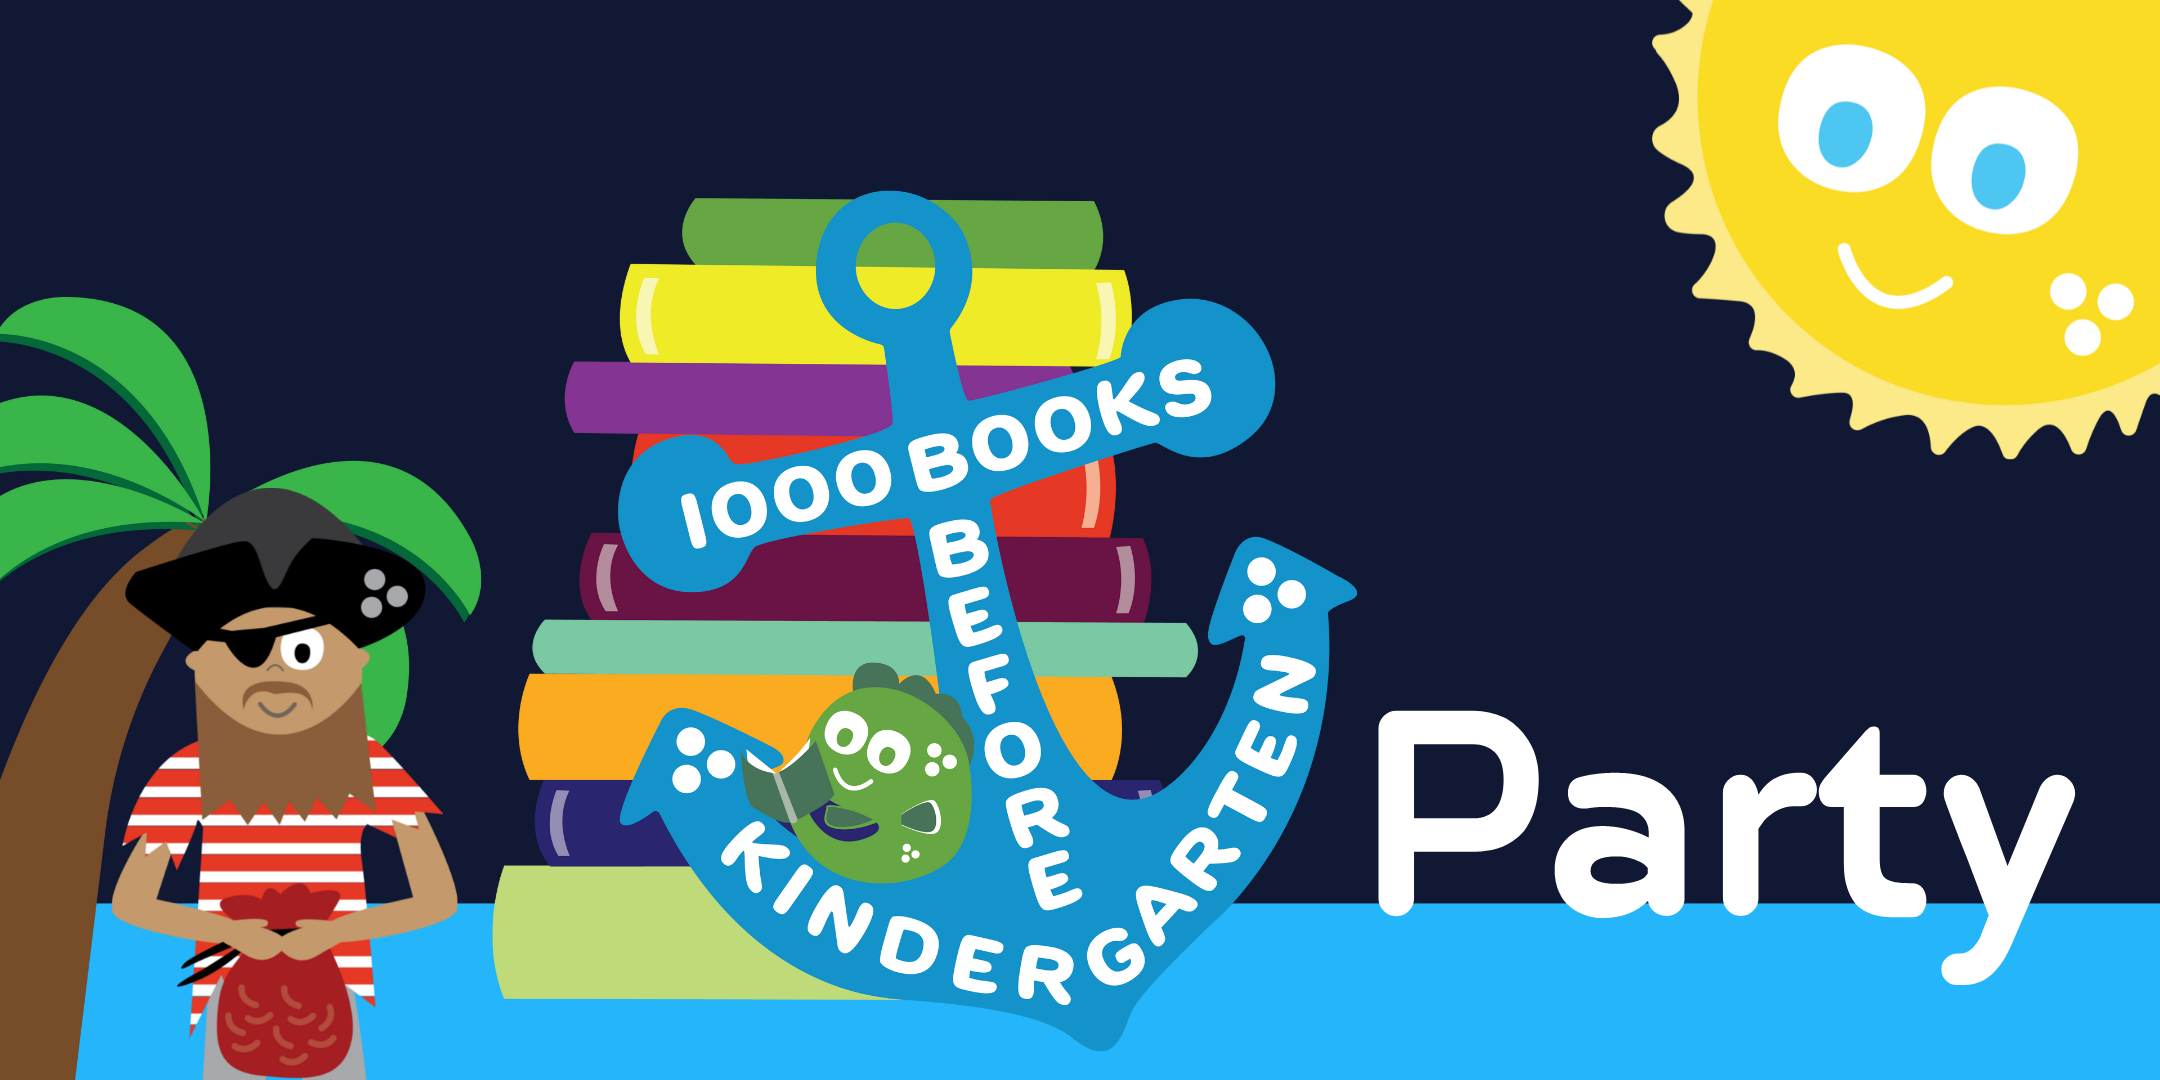 image of "1000 Books Before Kindergarten Party"